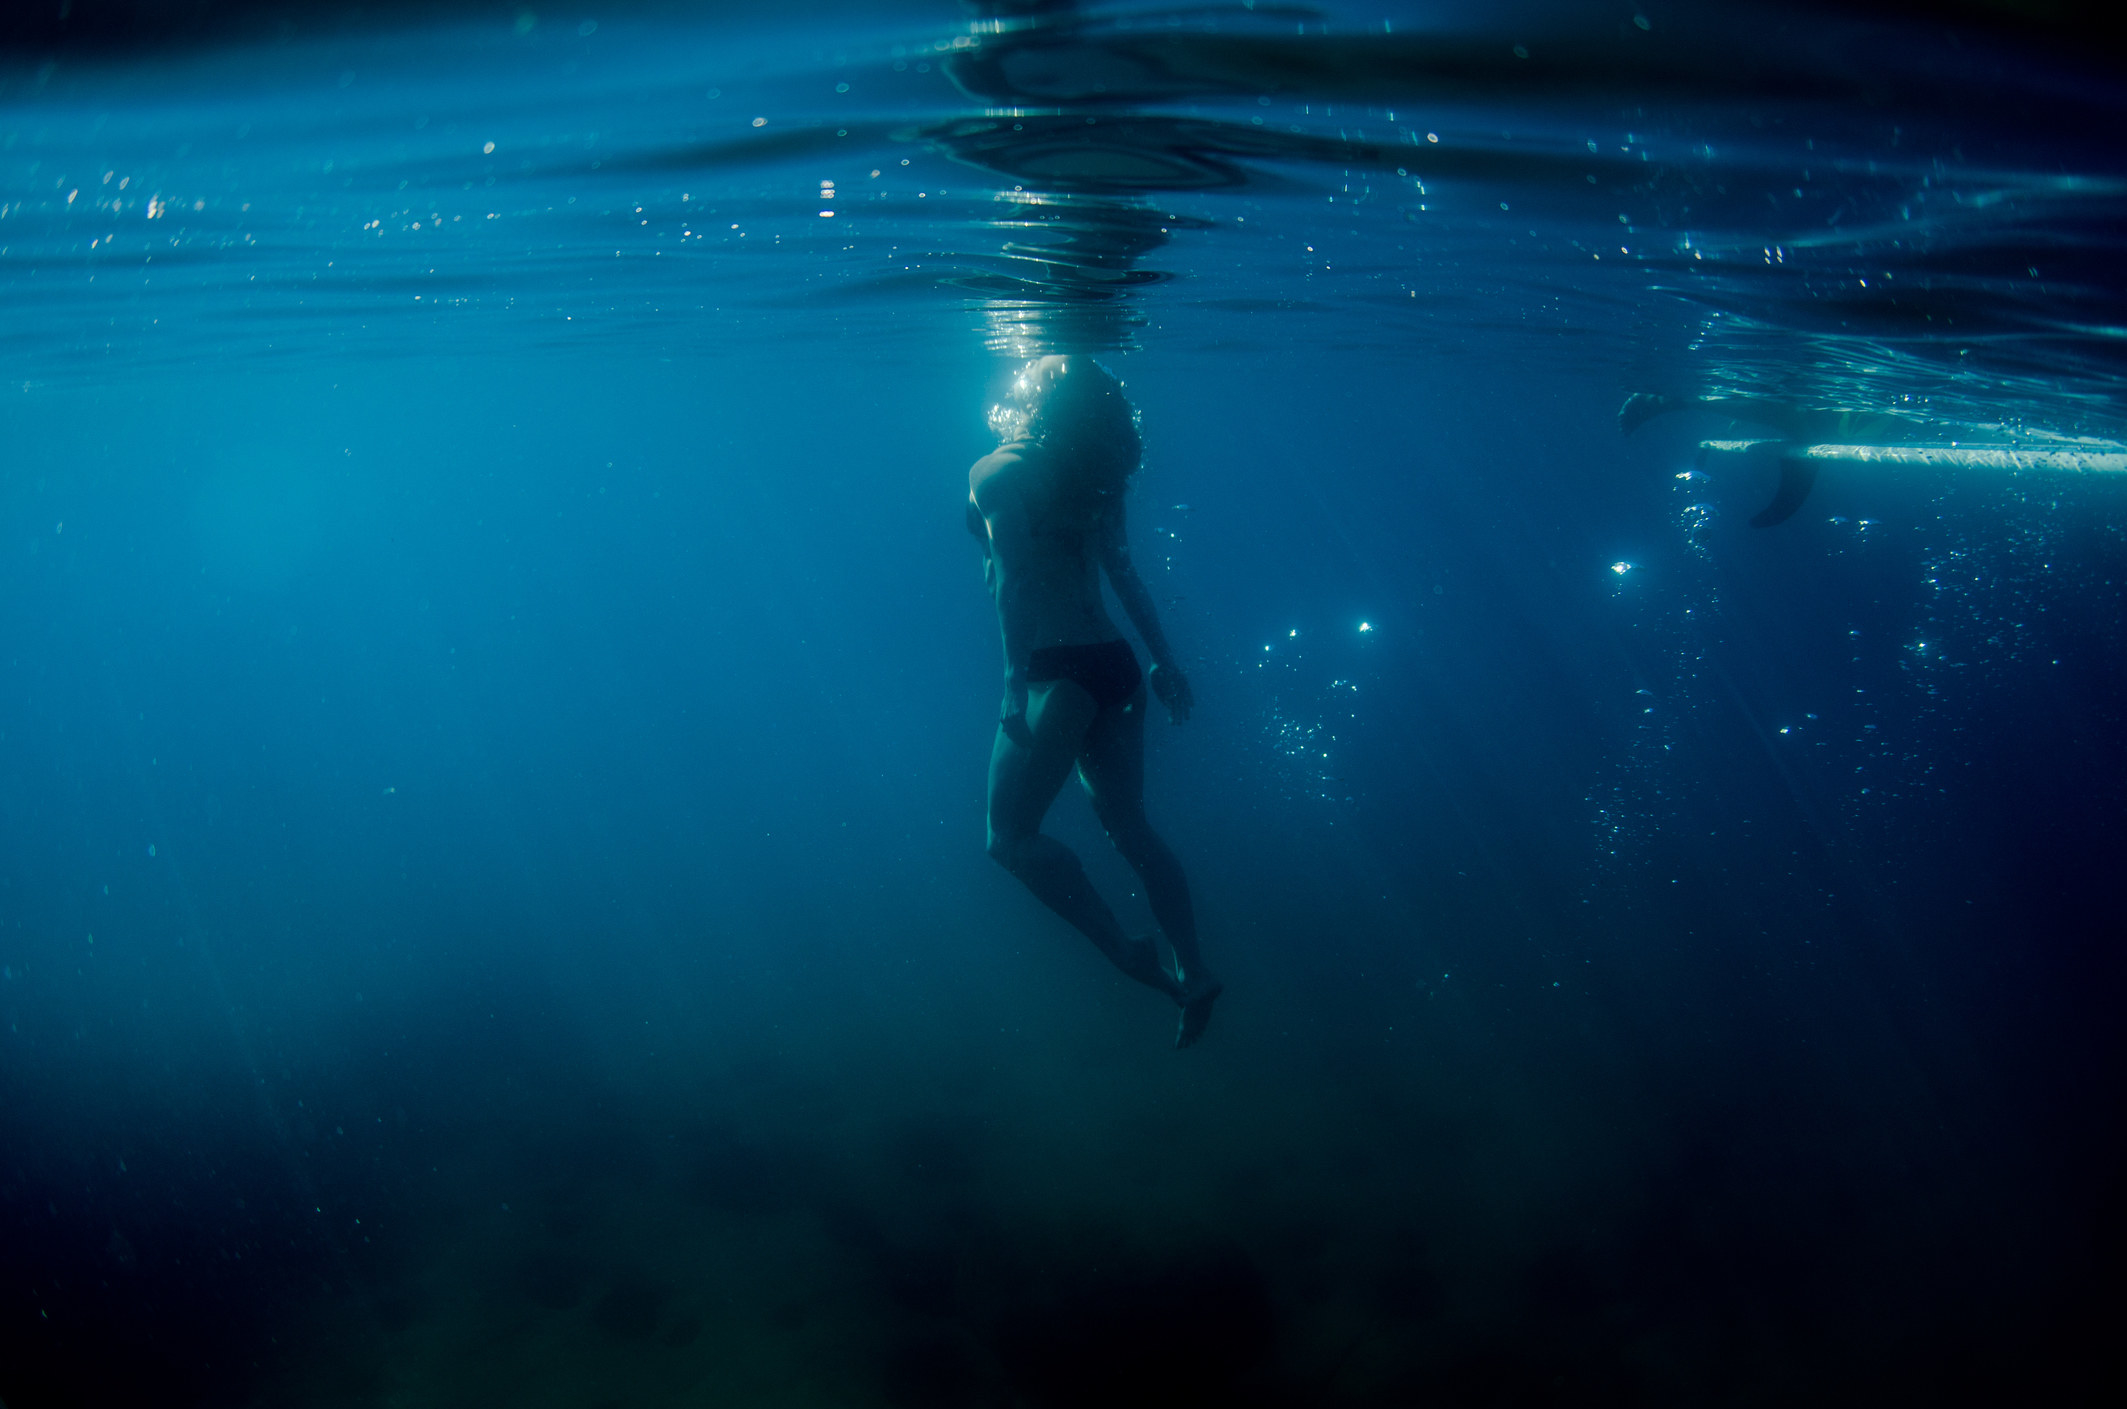 A person swimming under water